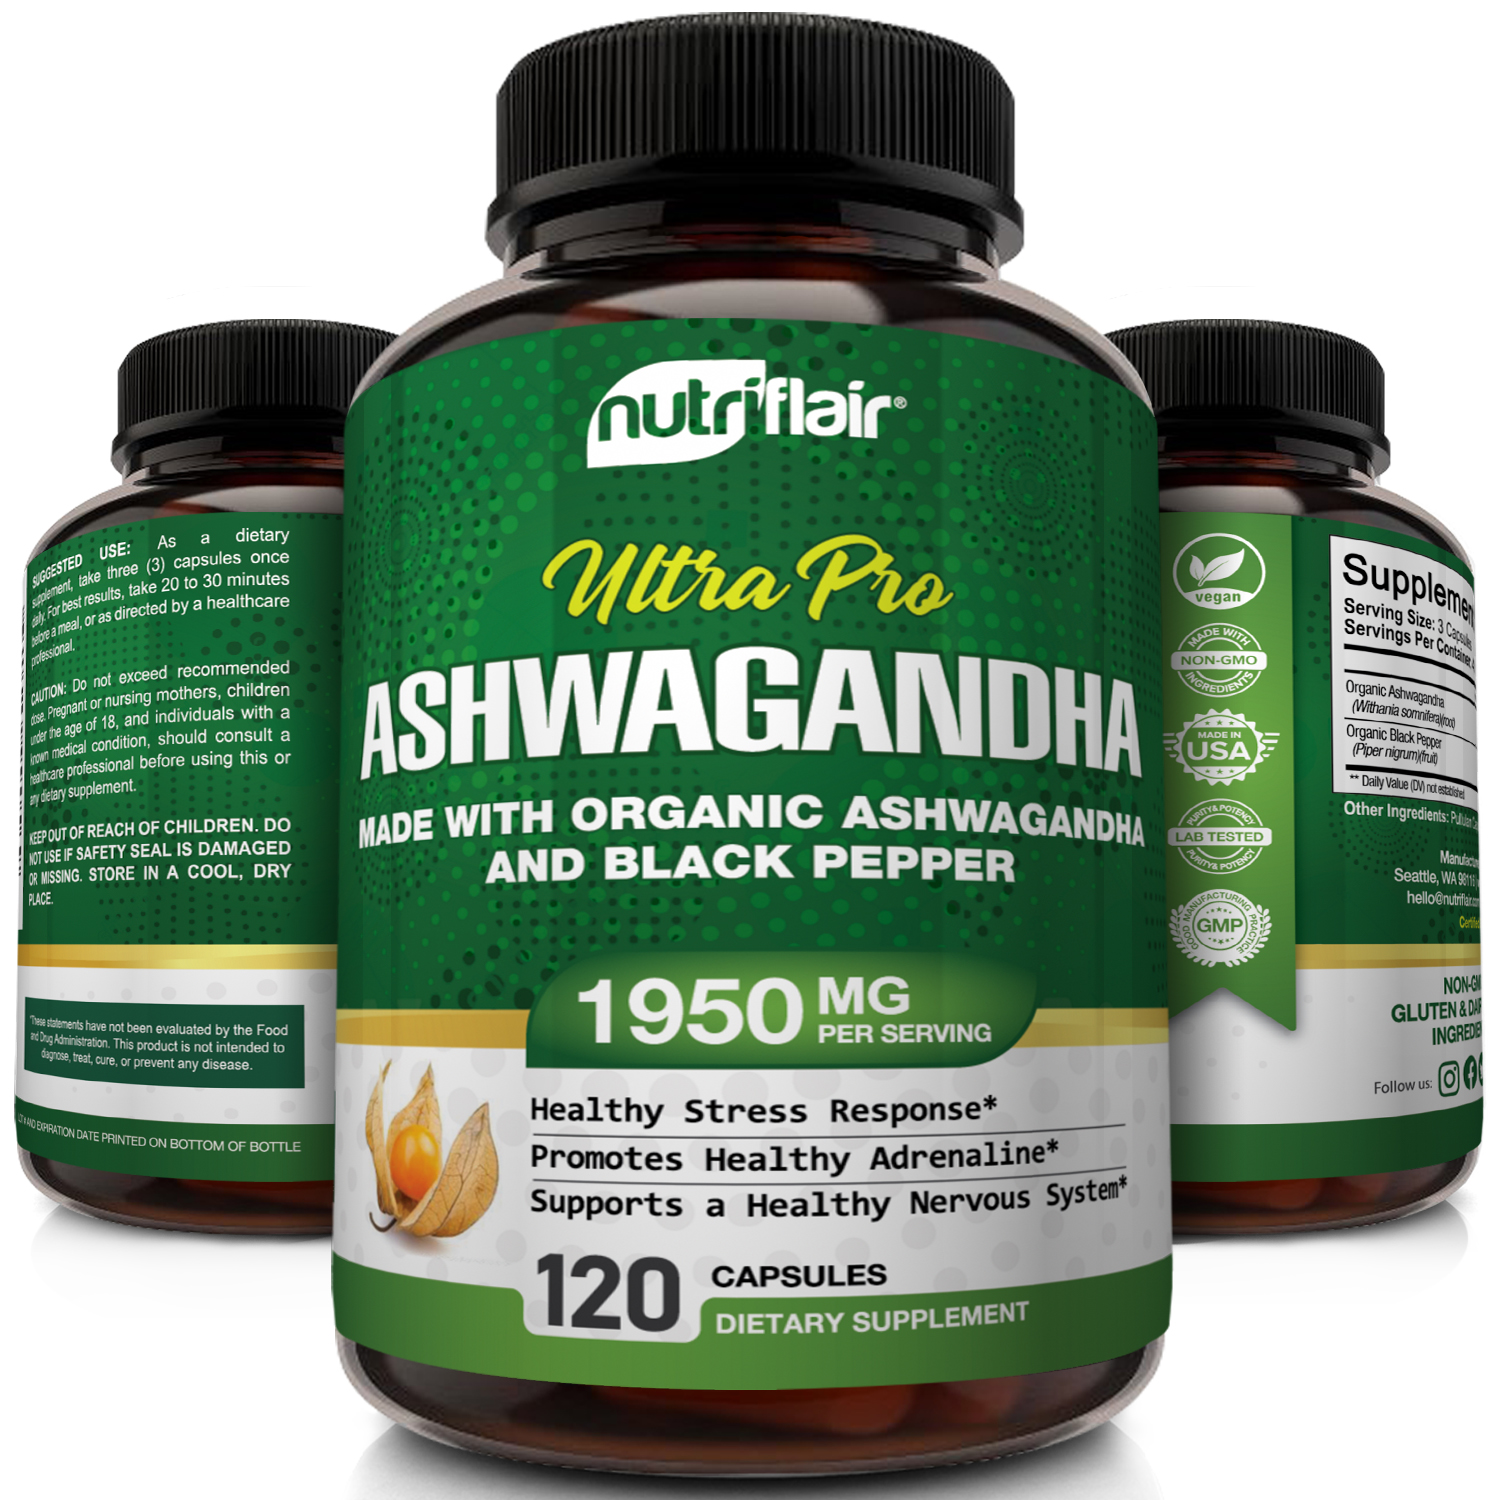 NutriFlair Certified Organic Ashwagandha Capsules for Natural Anxiety and Stress Relief Dietary Supplements 120 Capsules - image 1 of 7